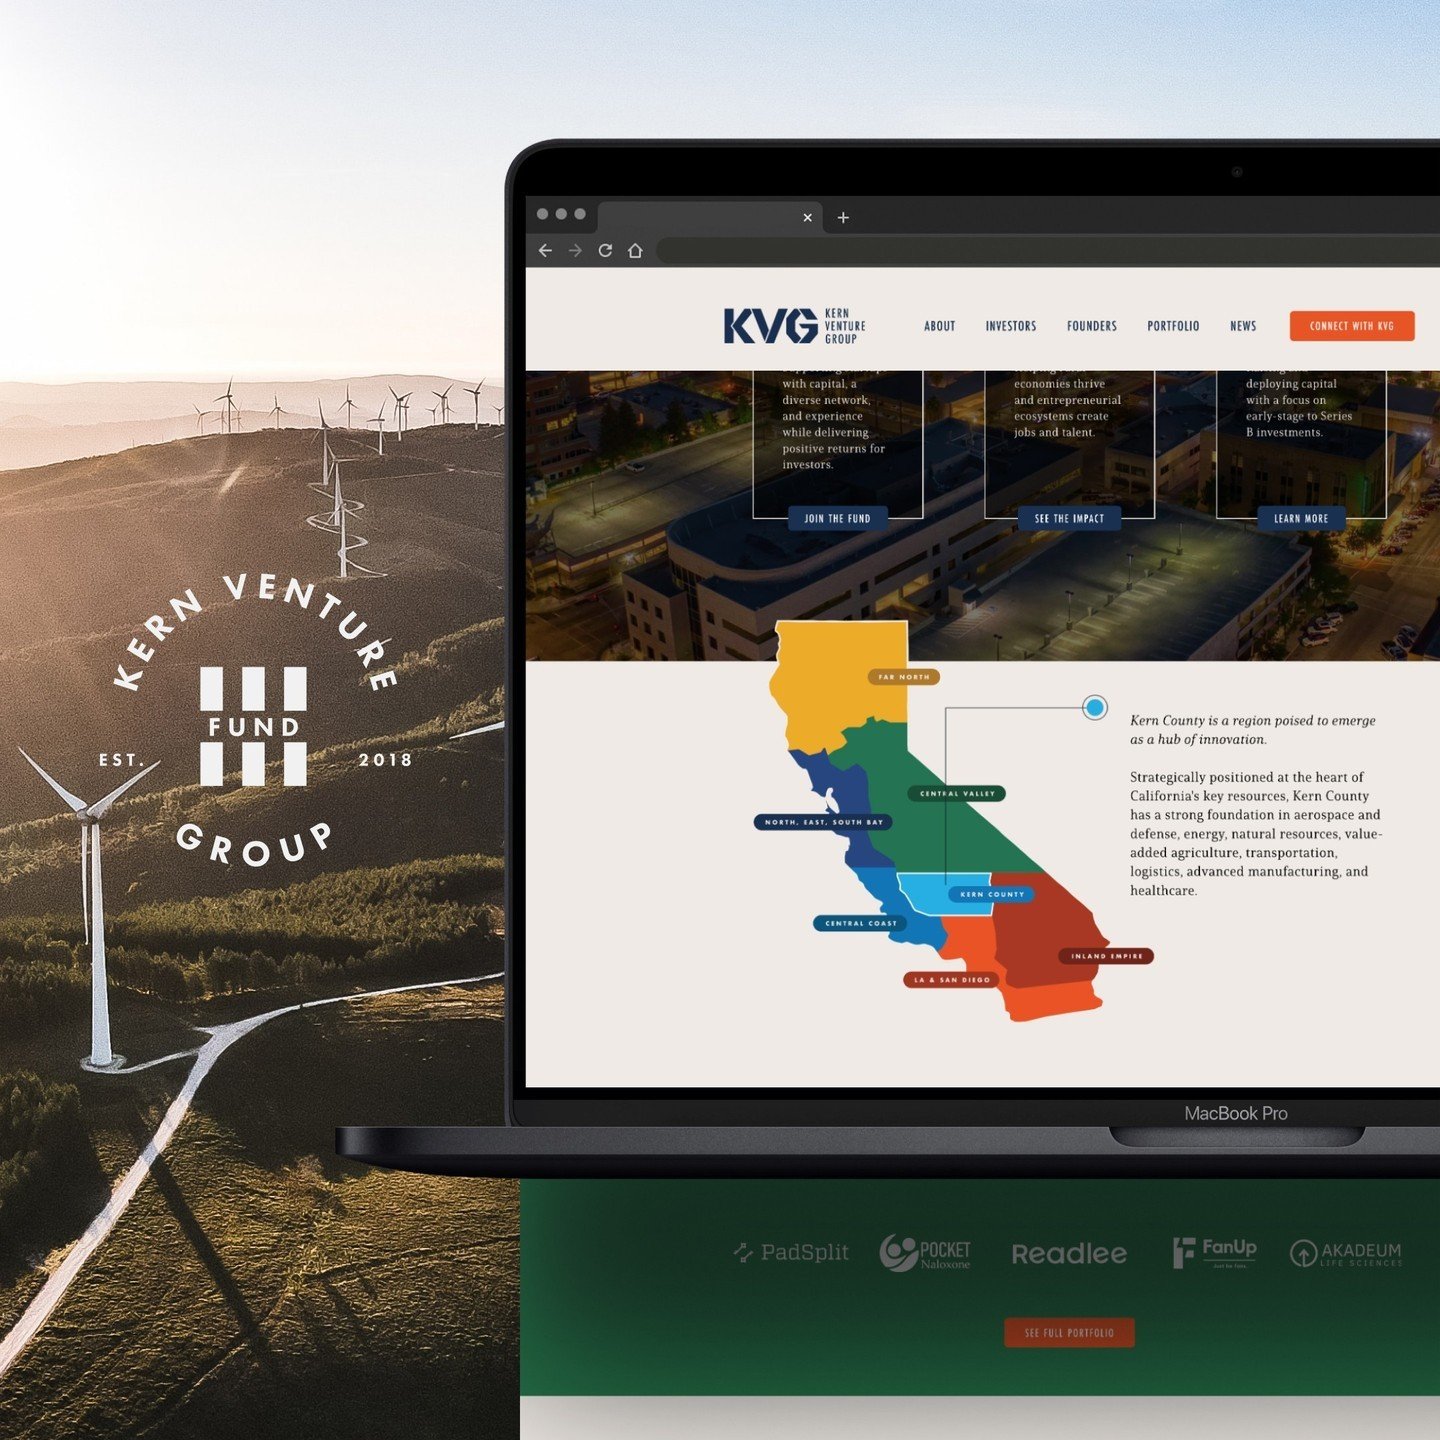 &quot;Kern County is a region poised to emerge as a hub of innovation.&quot;⁠
⁠
We are very proud to present the updated website and brand refresh we recently completed for Kern Venture Group. This team is truly helping rural economies thrive and ent